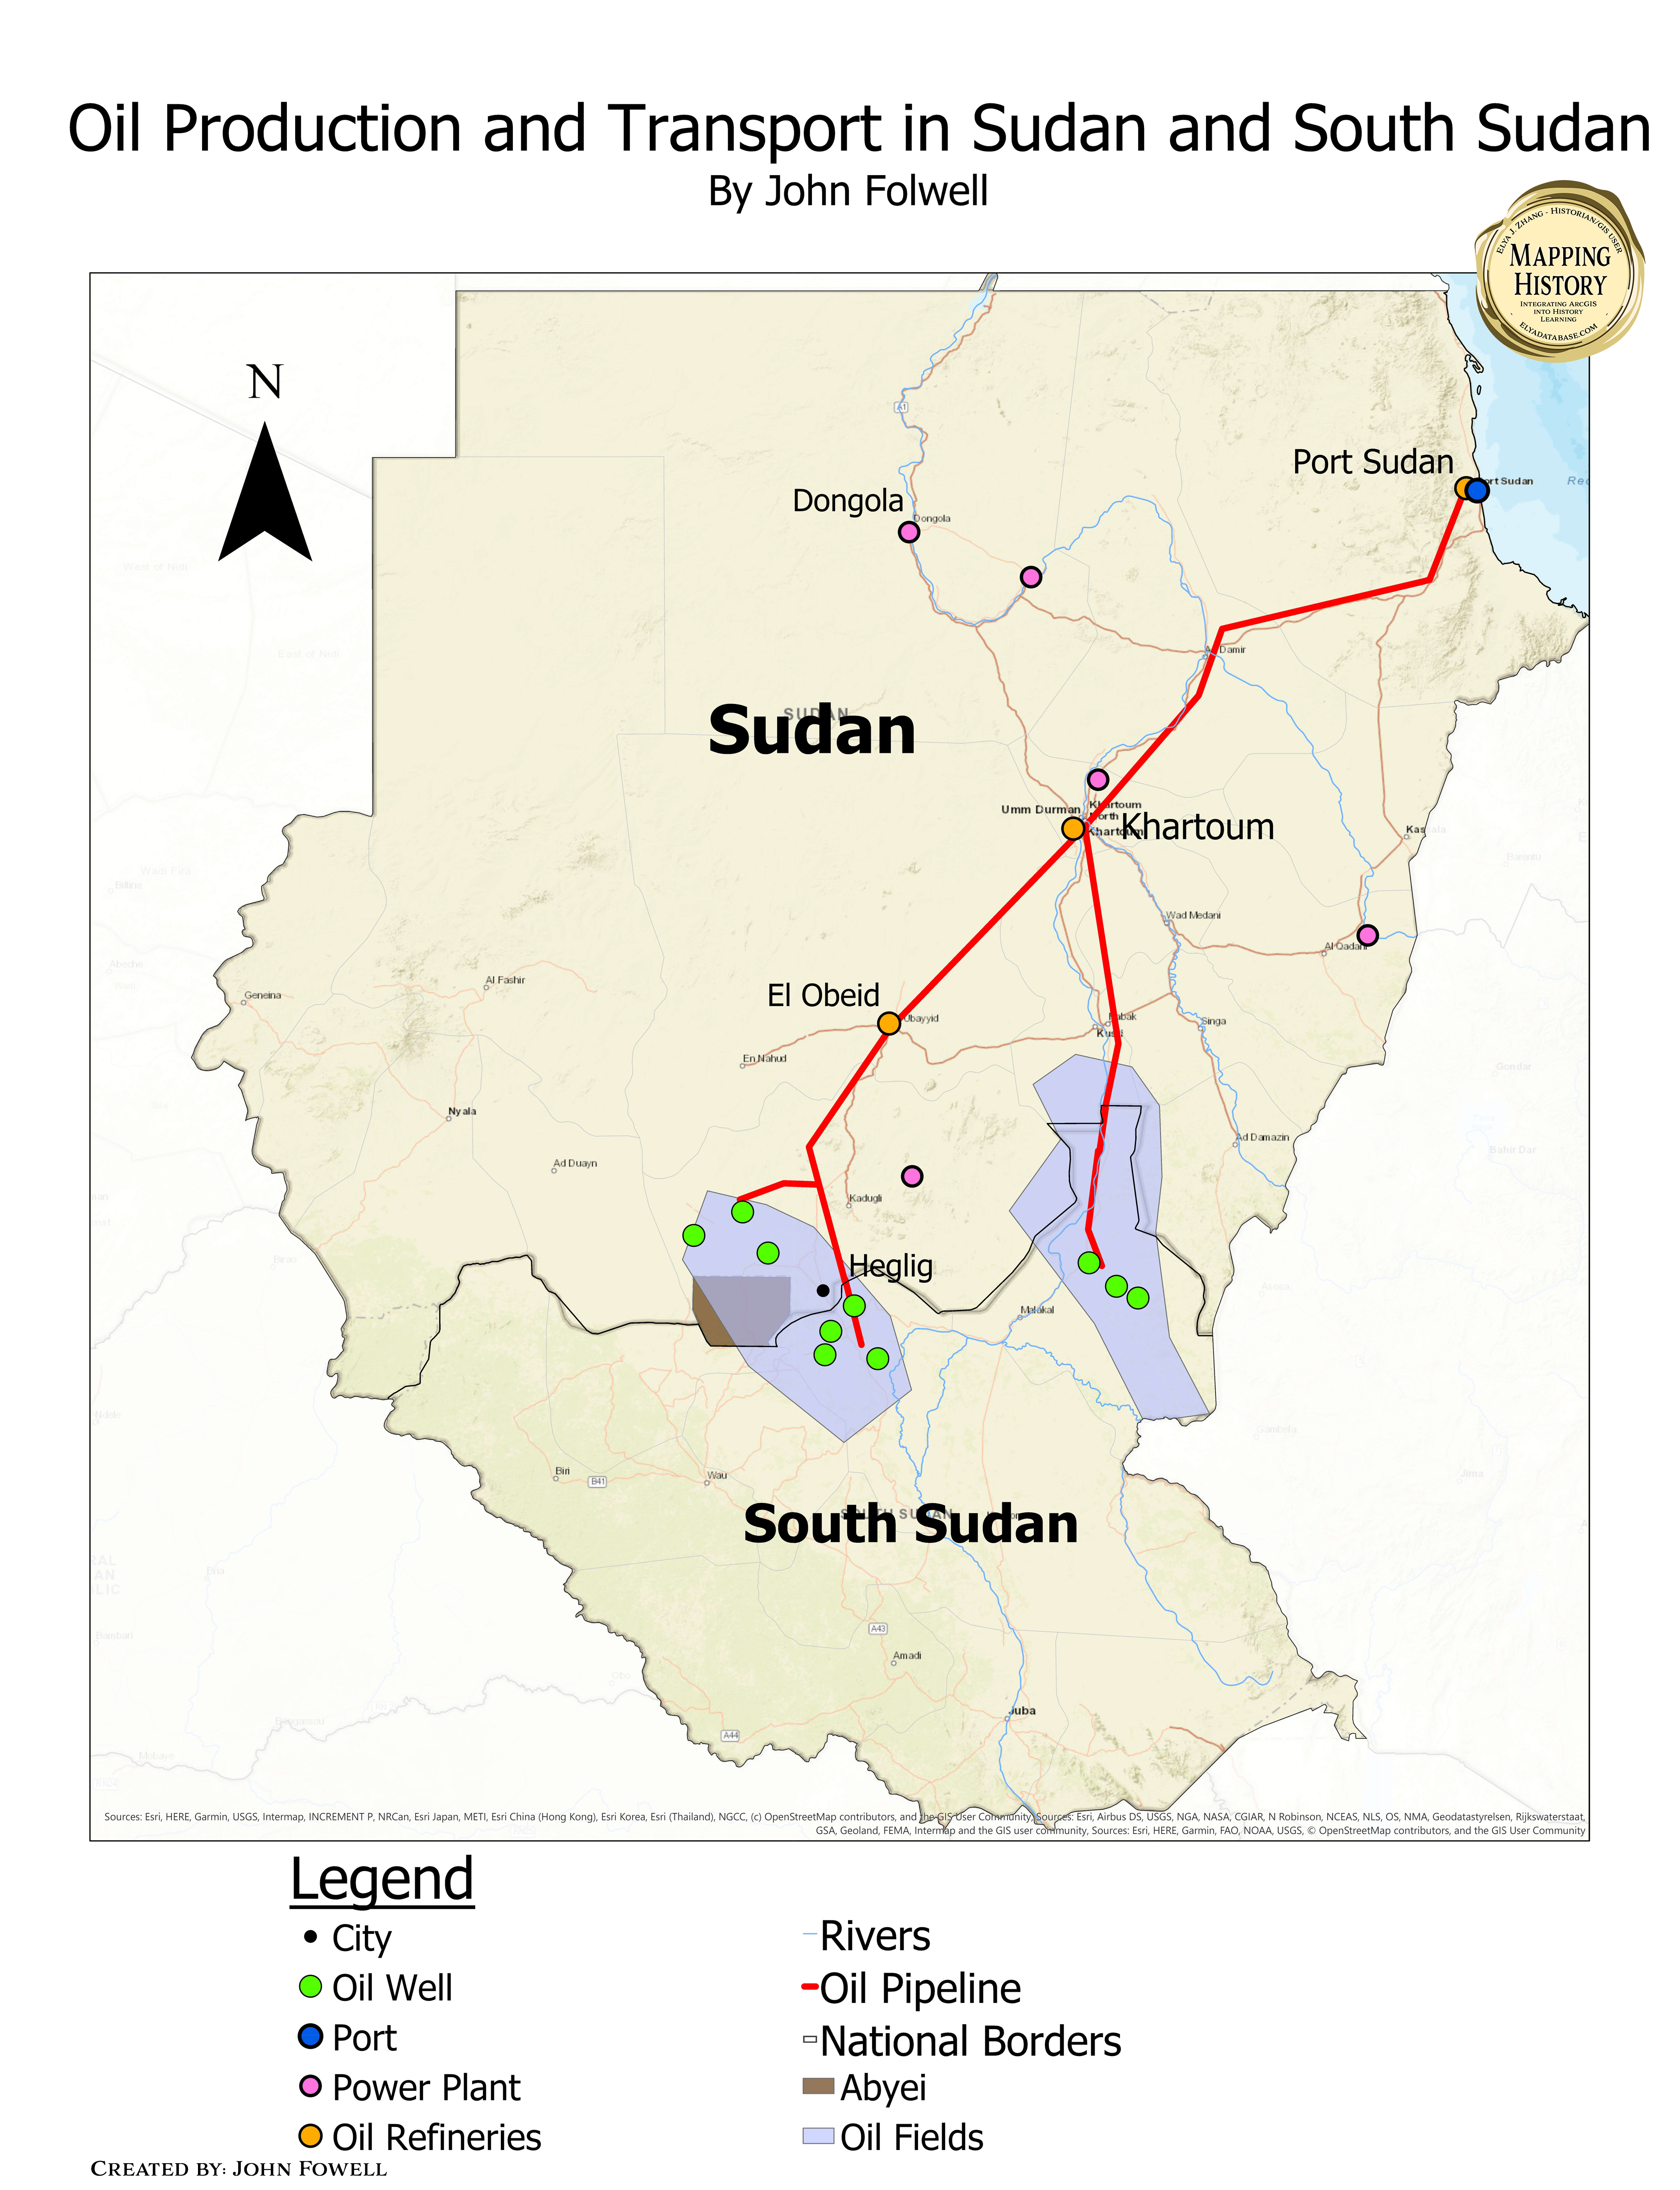 Oil Production and Transport in Sudan and South Sudan